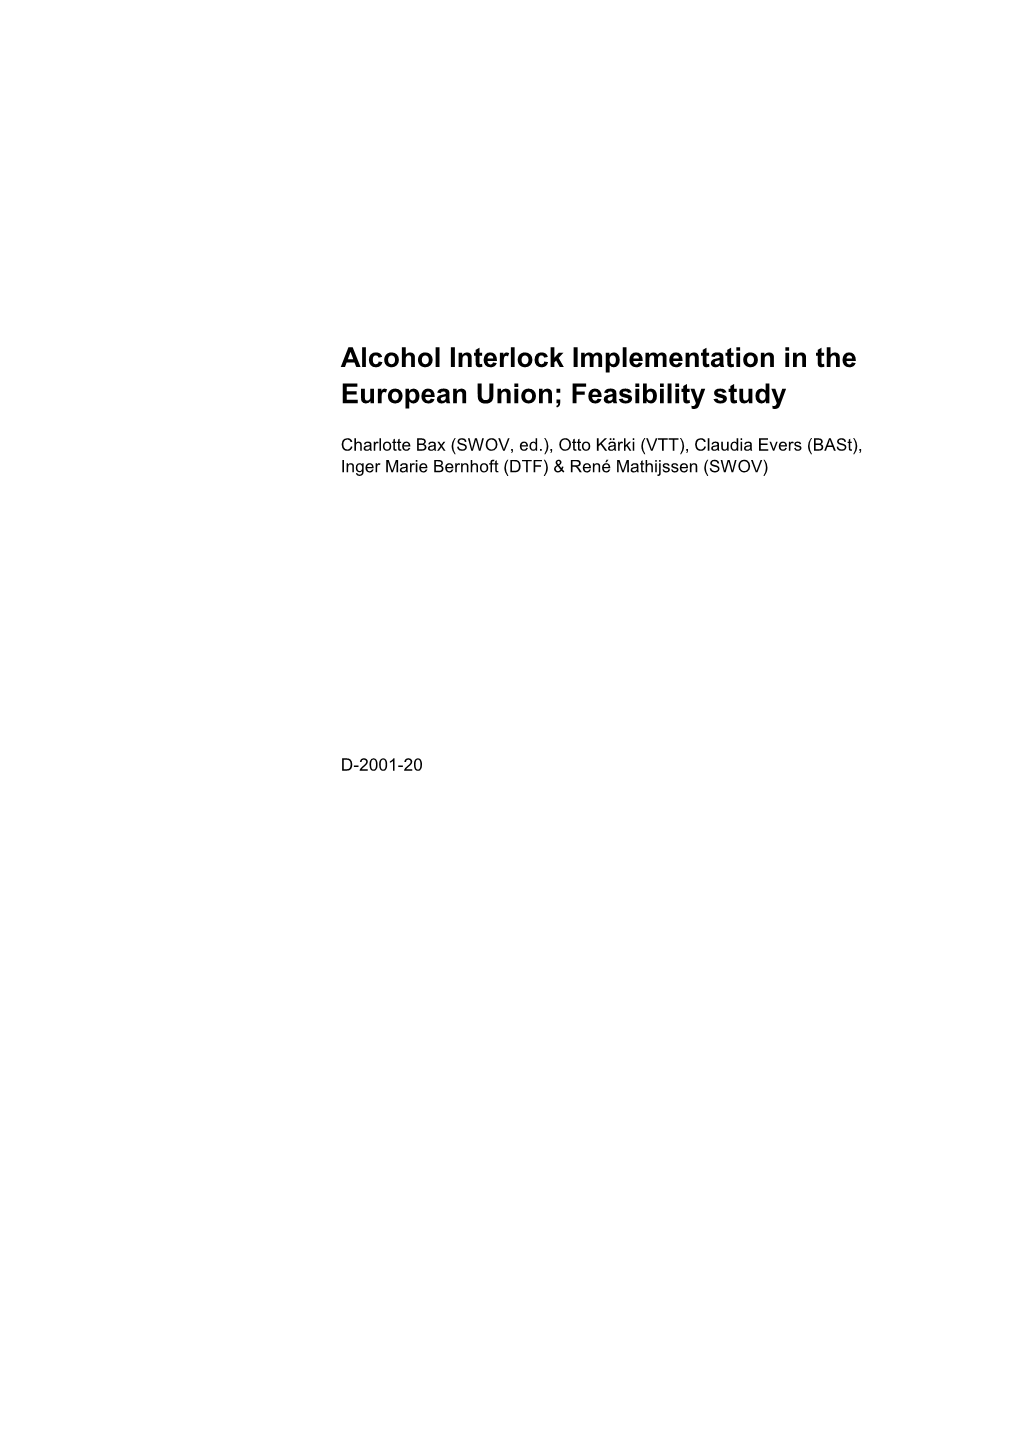 Alcohol Interlock Implementation in the European Union; Feasibility Study